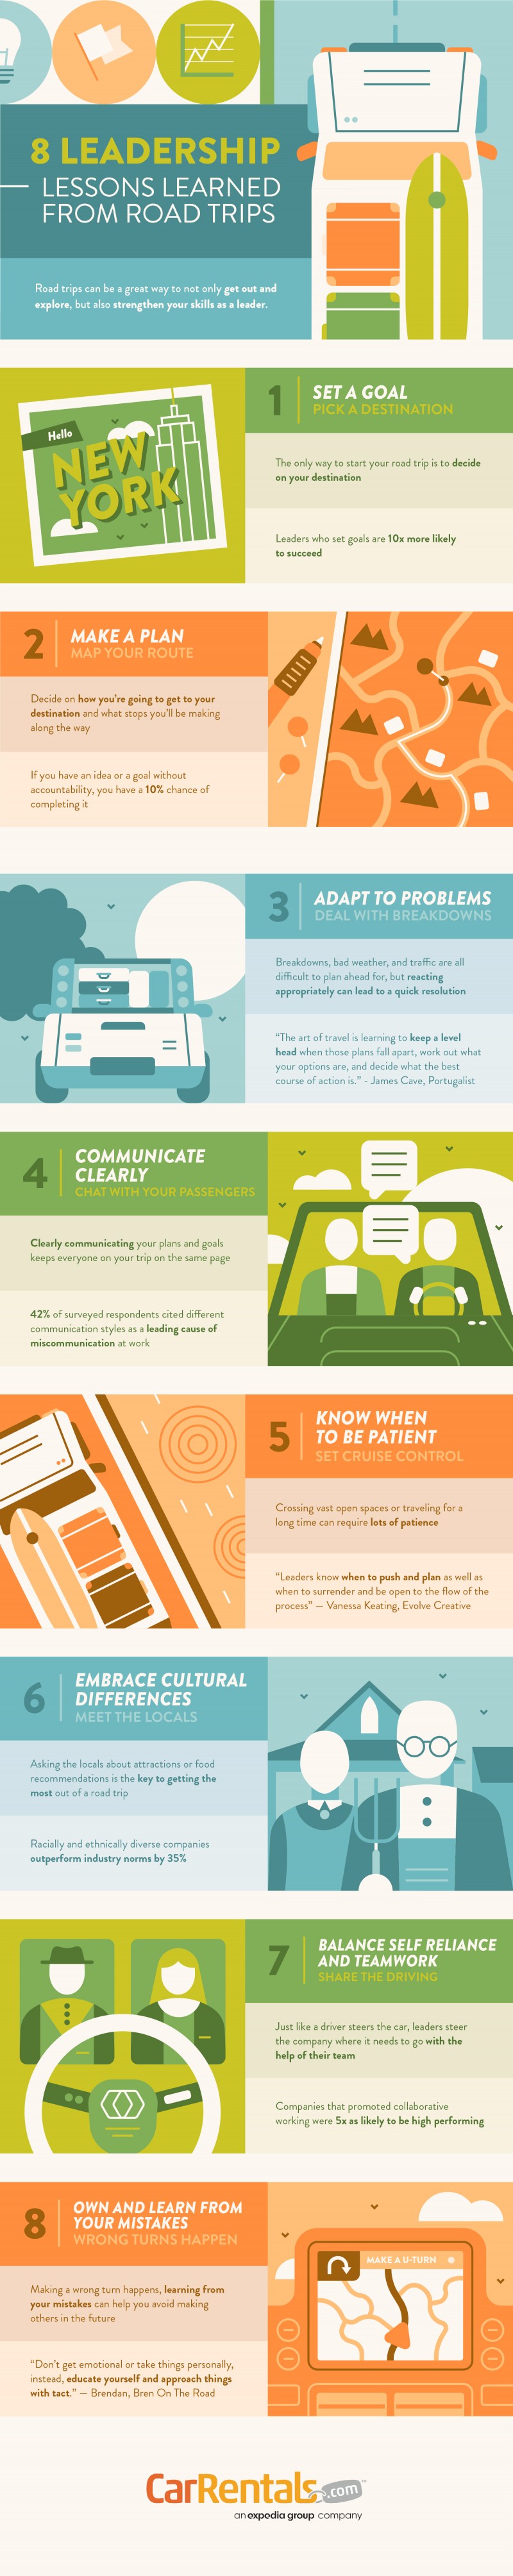 leadeship_lessons_from_road_trips_infographic (2)